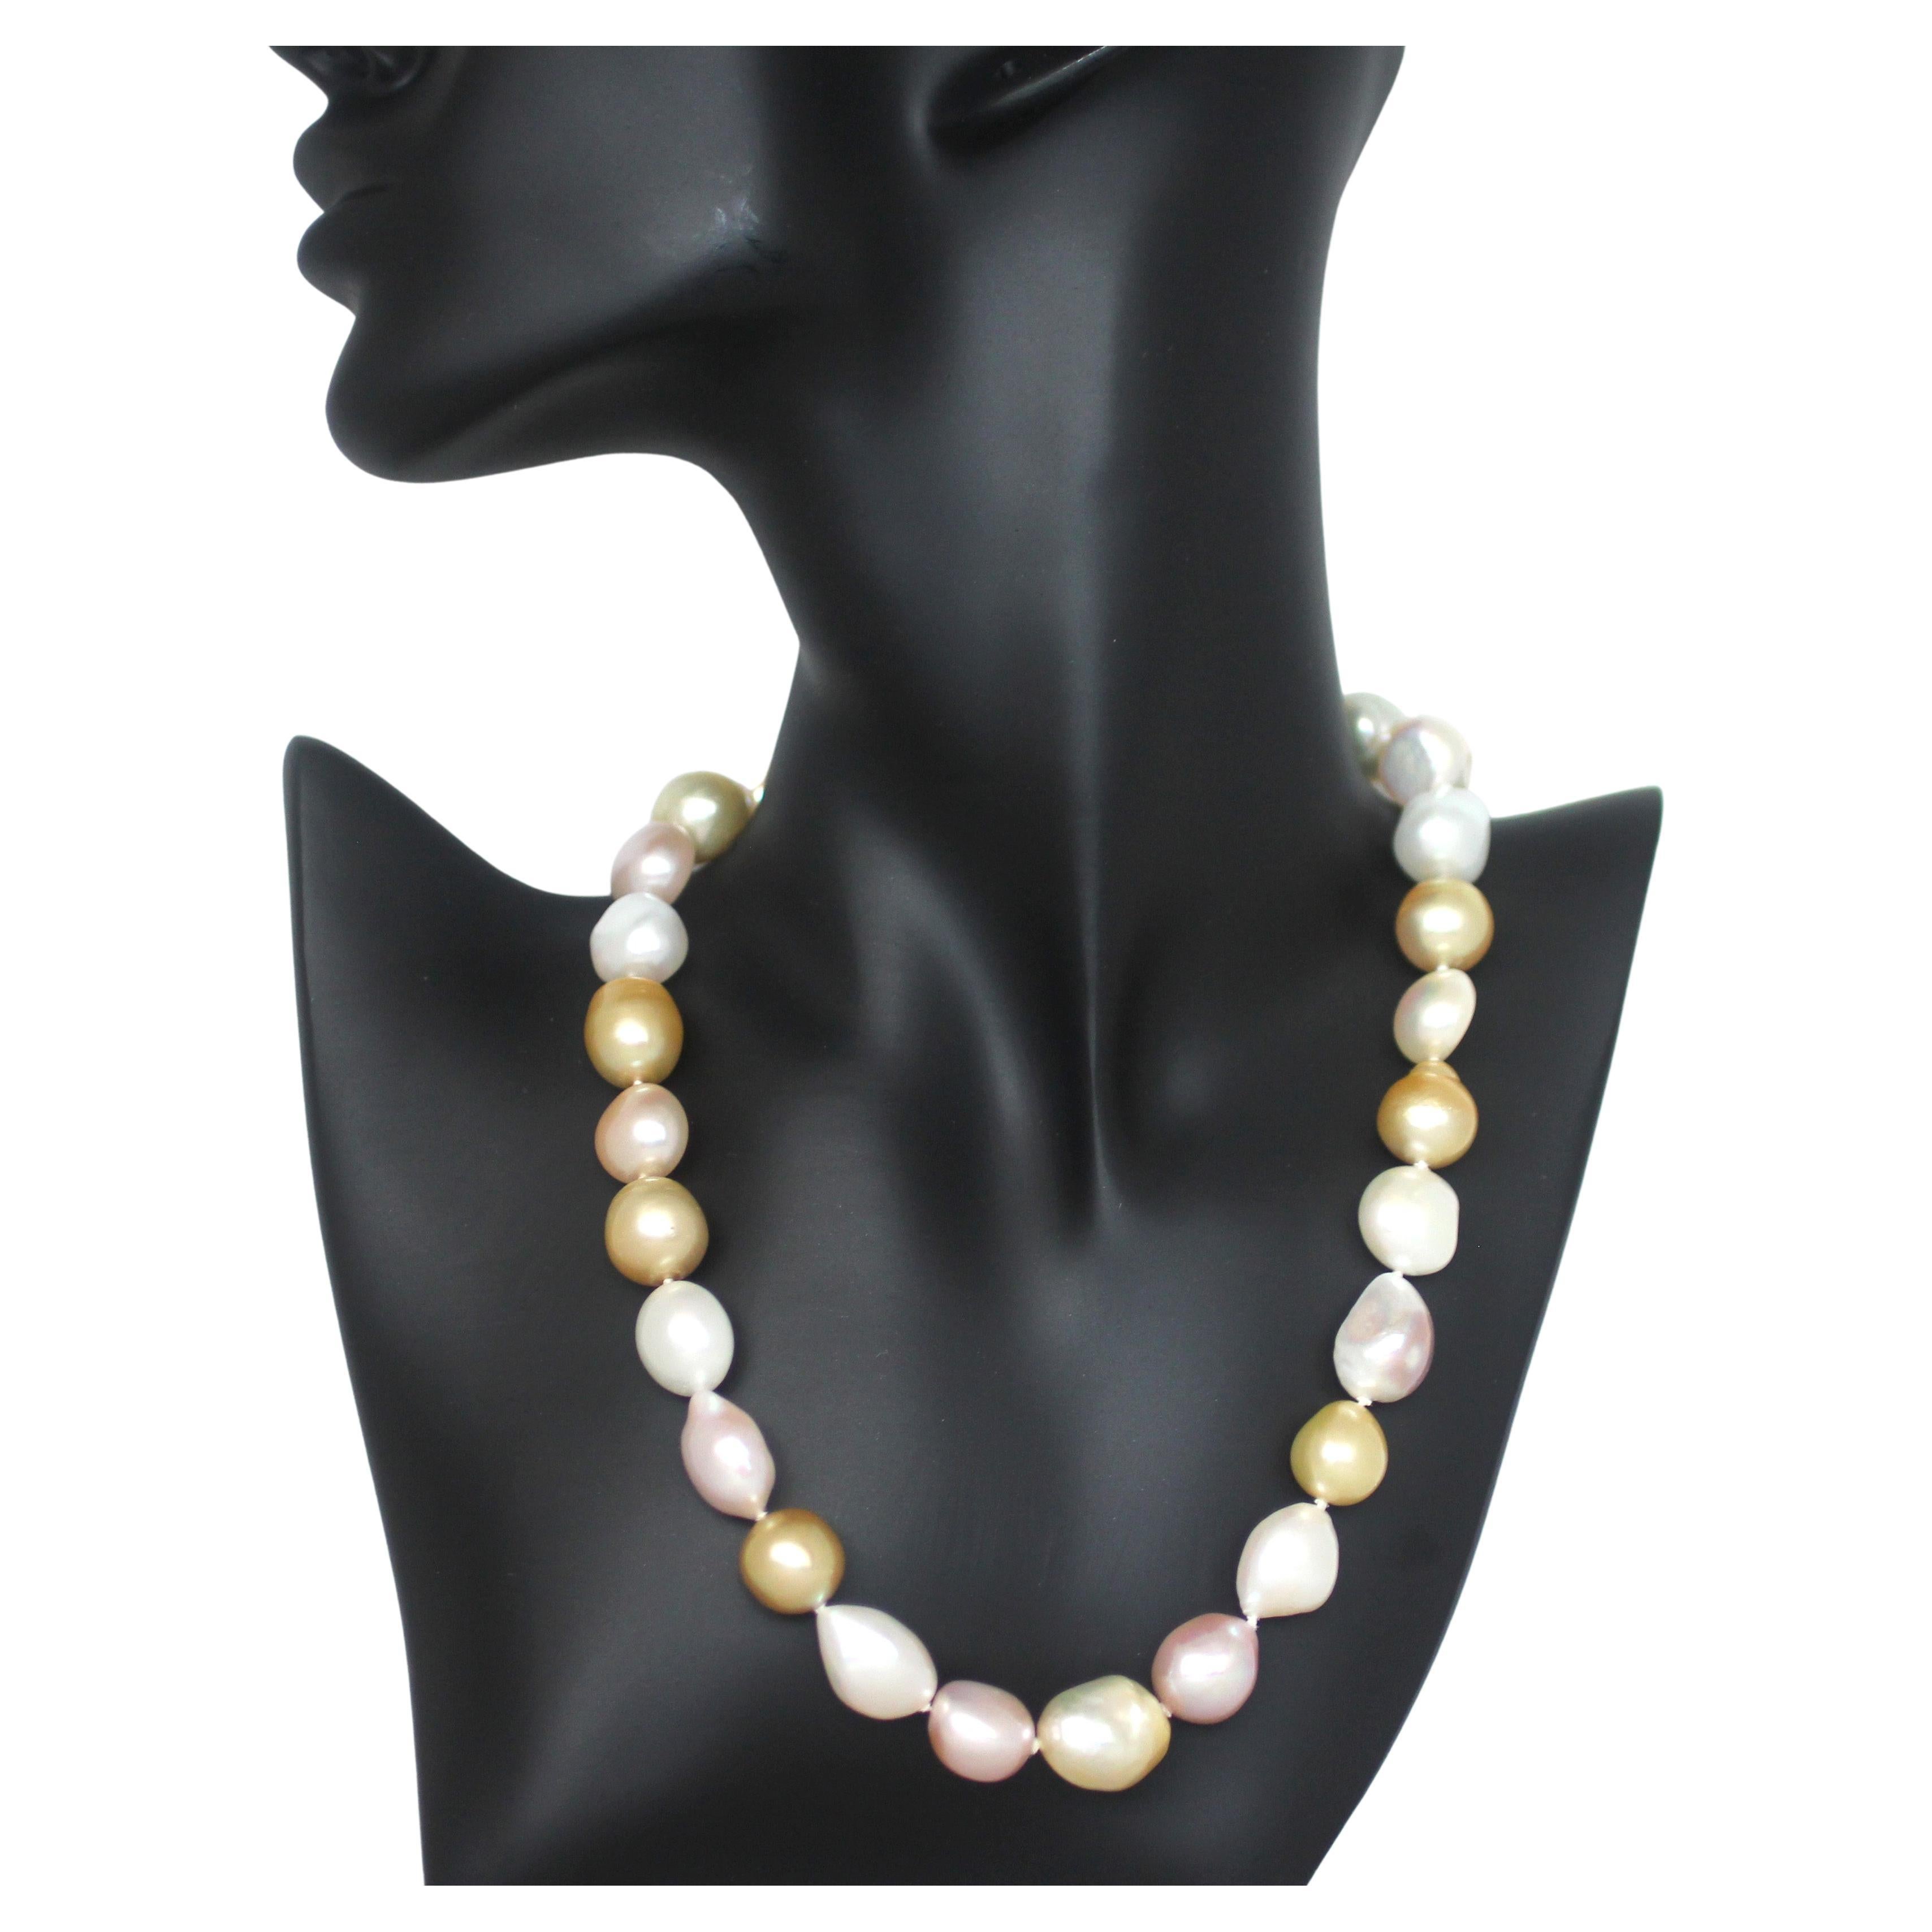 Hakimoto By Jewel Of Ocean 18K Strand Necklace
18K Yellow Gold  
Weight (g): 86.5
Cultured Golden South Sea and Fresh Water Baroque Pearl 
Pearl Size: 13X15mm 
Pearl Shape: Baroque
Body color: Natural Pastel Color
Orient: Very Good
Luster: Very Good